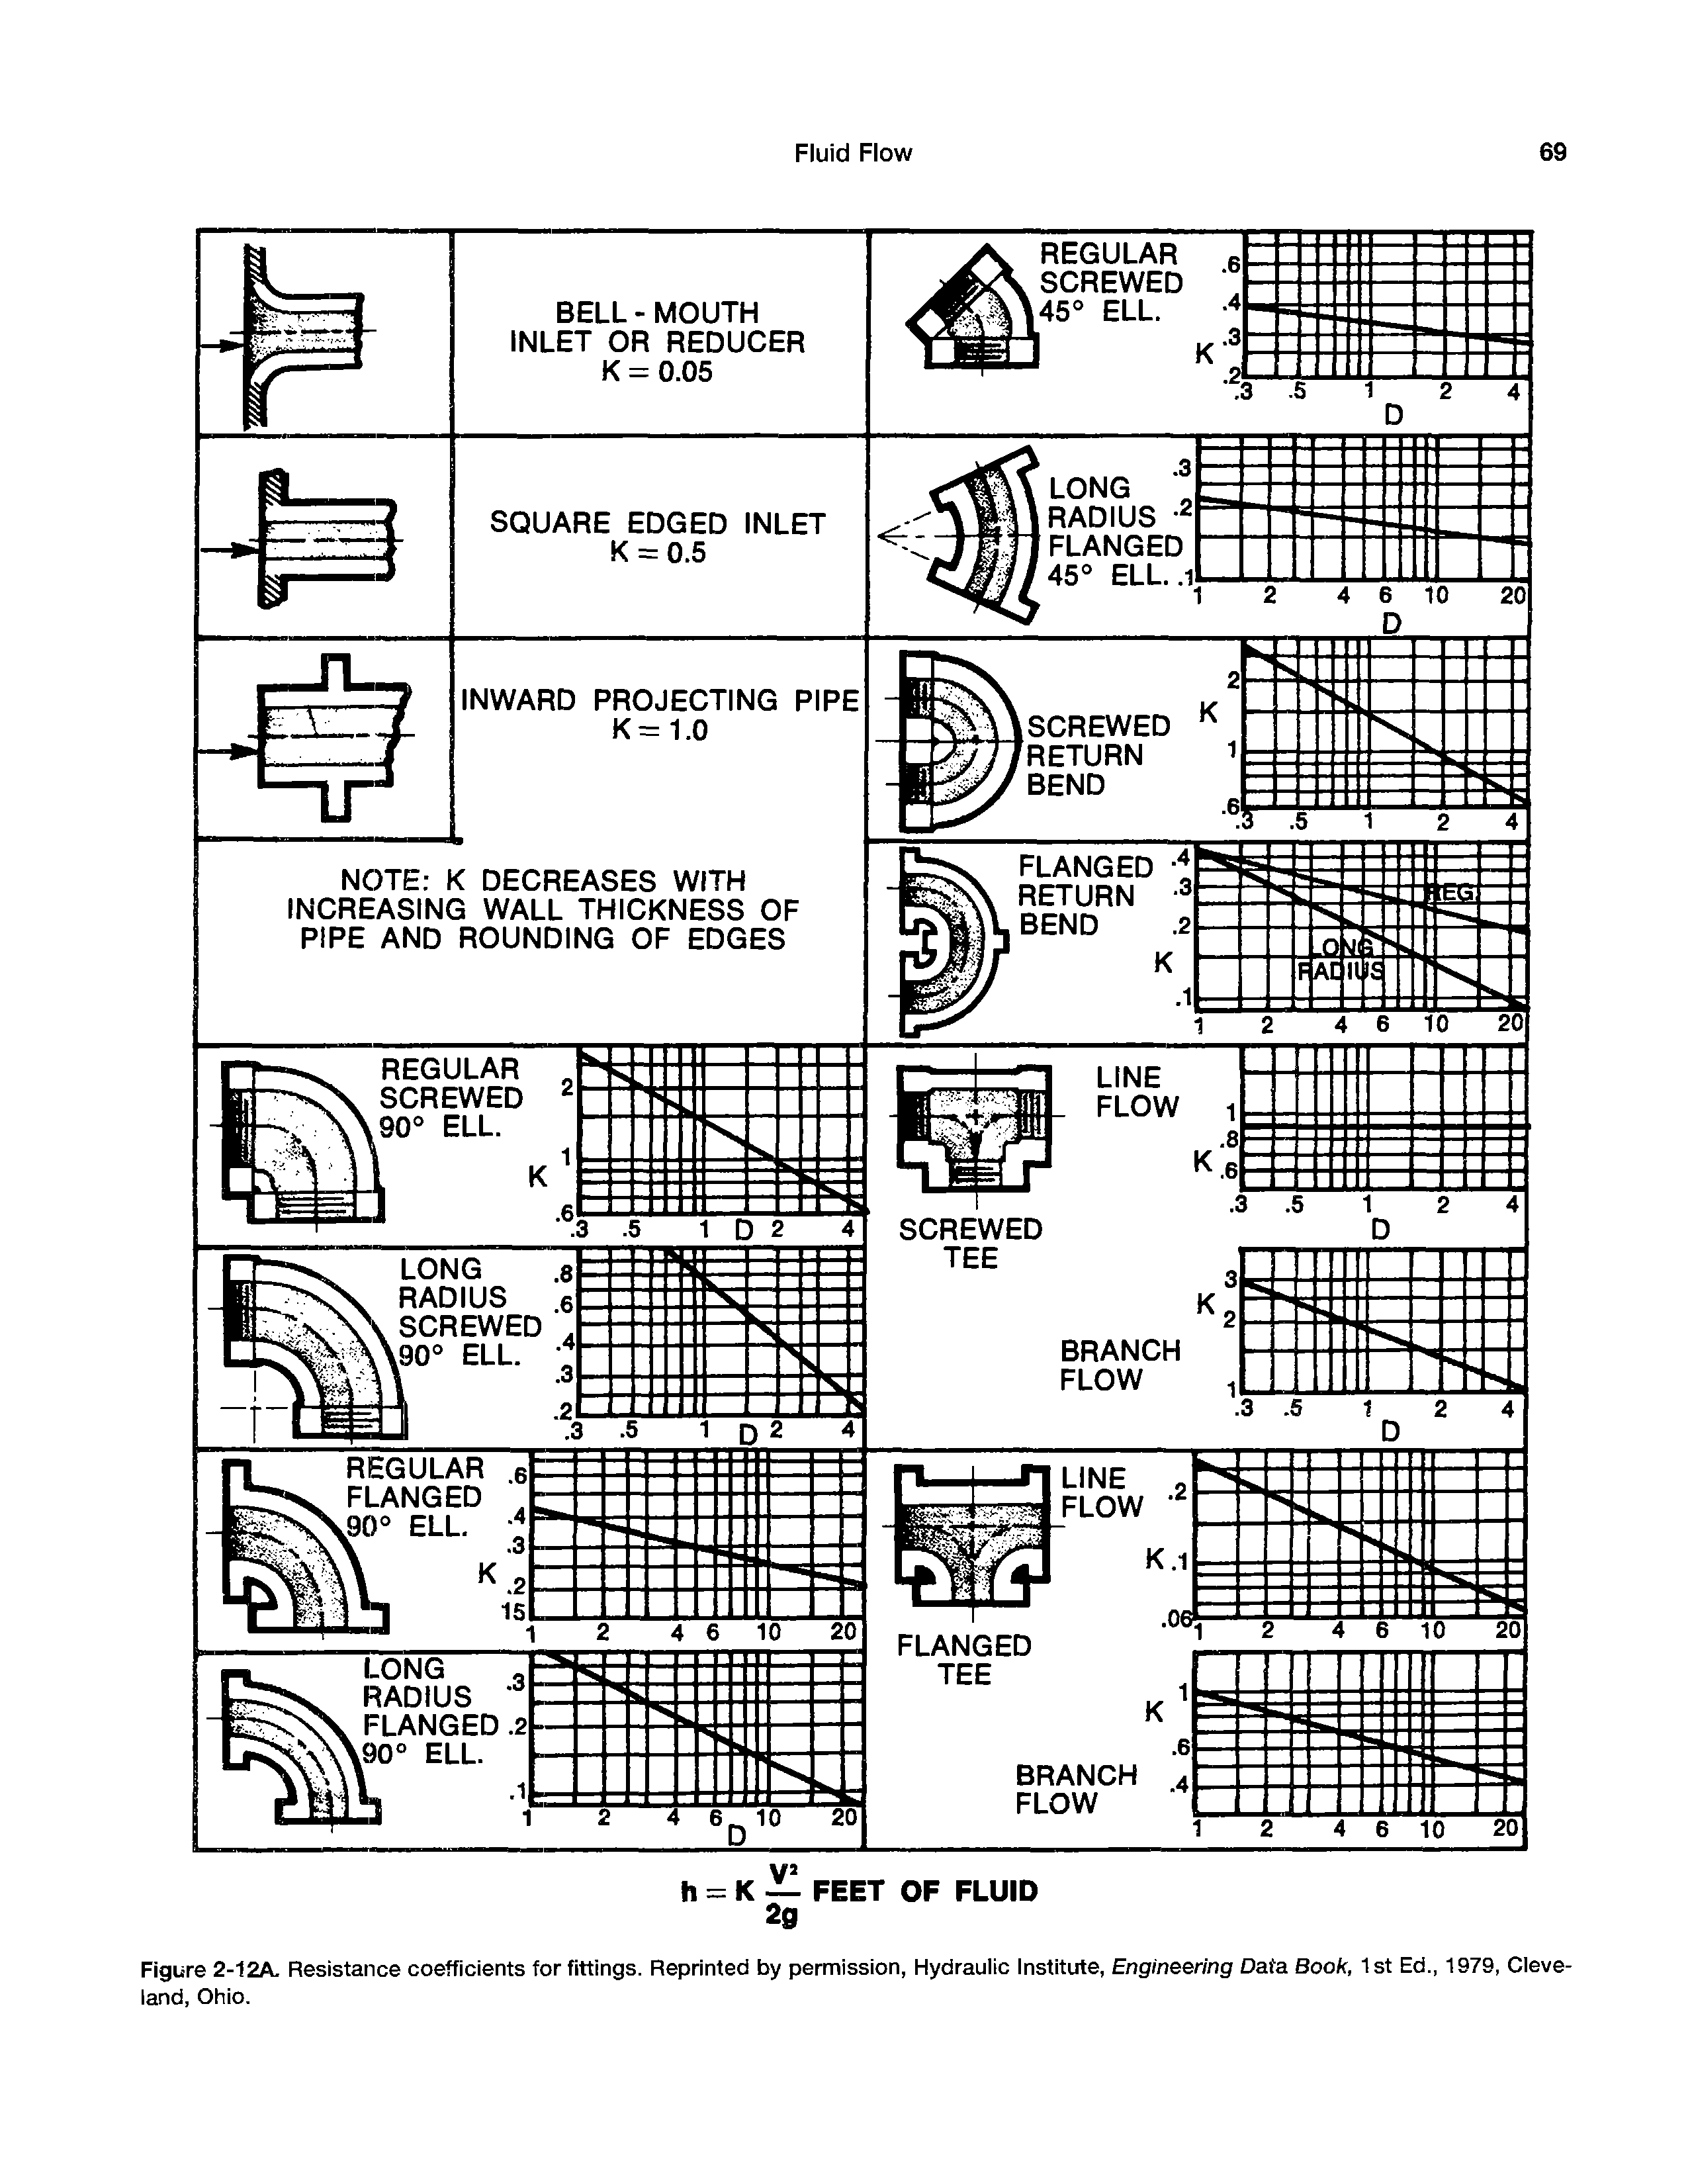 Figure 2-12A. Resistance coefficients for fittings. Reprinted by permission, Hydraulic Institute, Engineering Data Book, 1st Ed., 1979, Cleveland, Ohio.